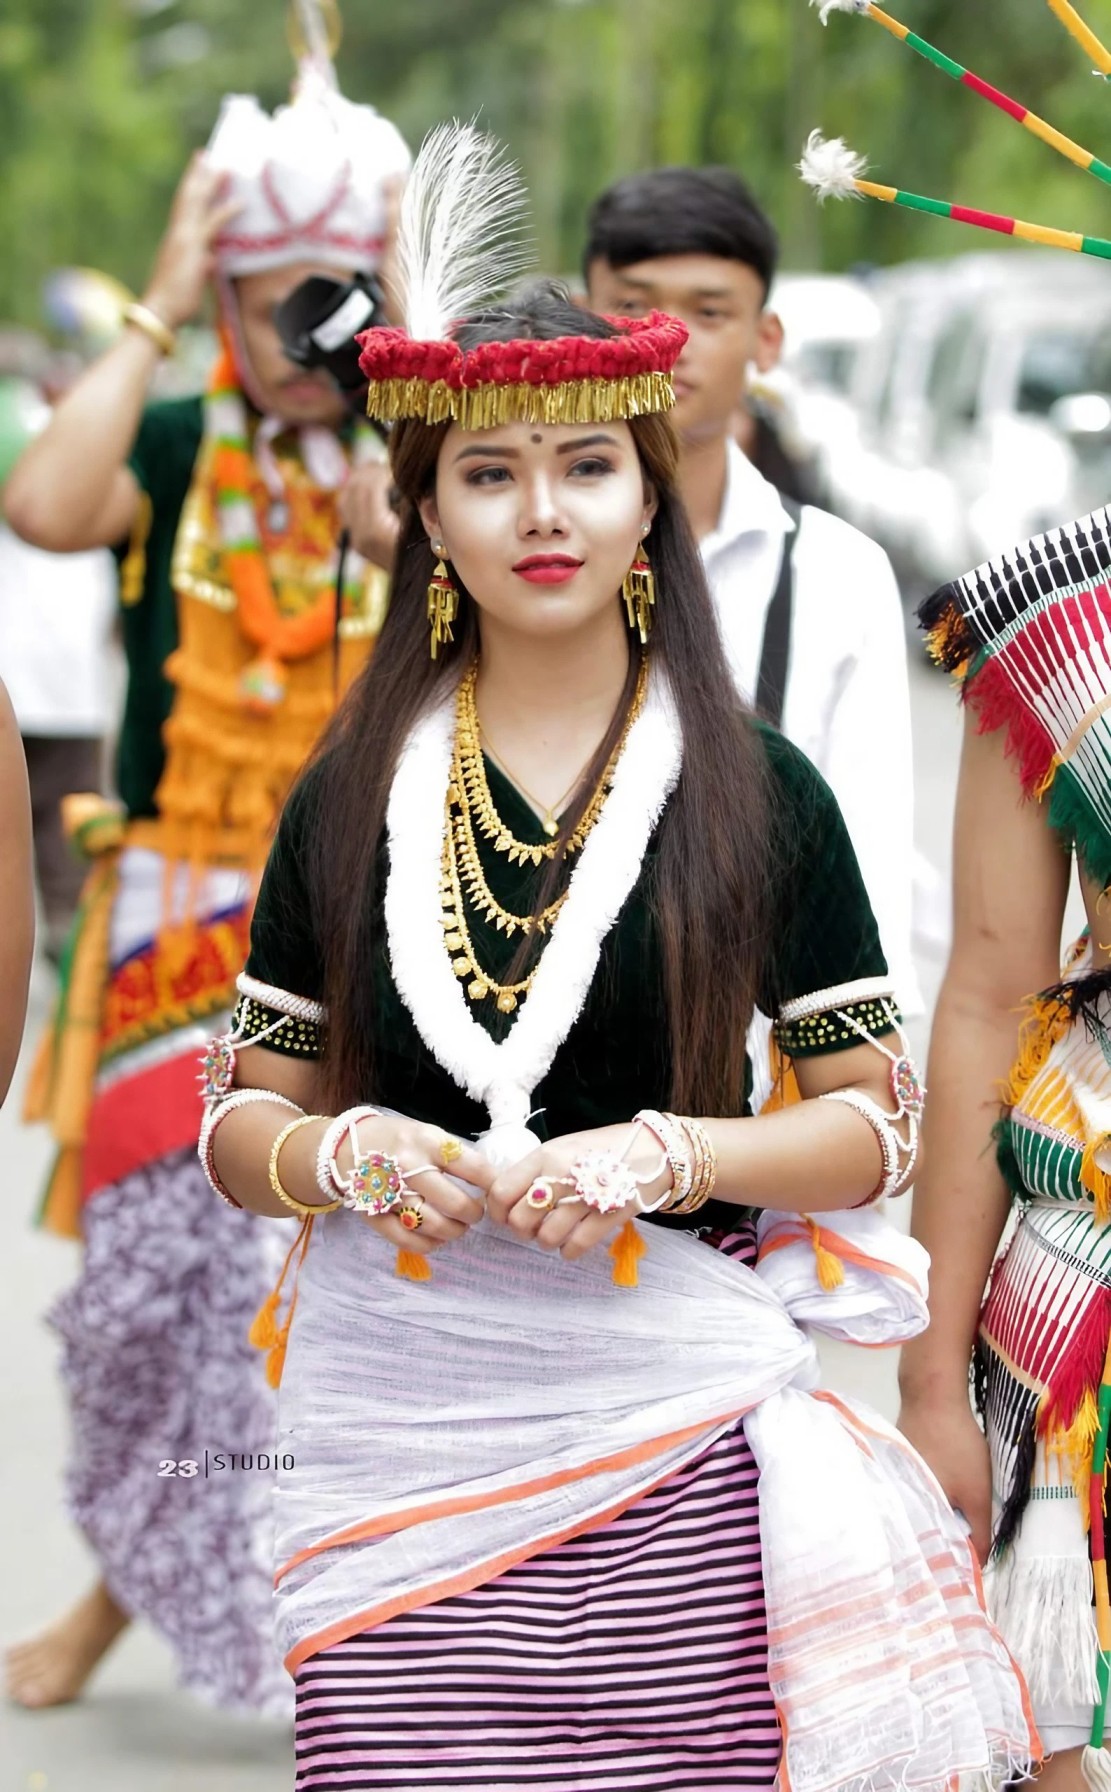 File:An Ao Naga lady in her traditional attire.jpg - Wikipedia